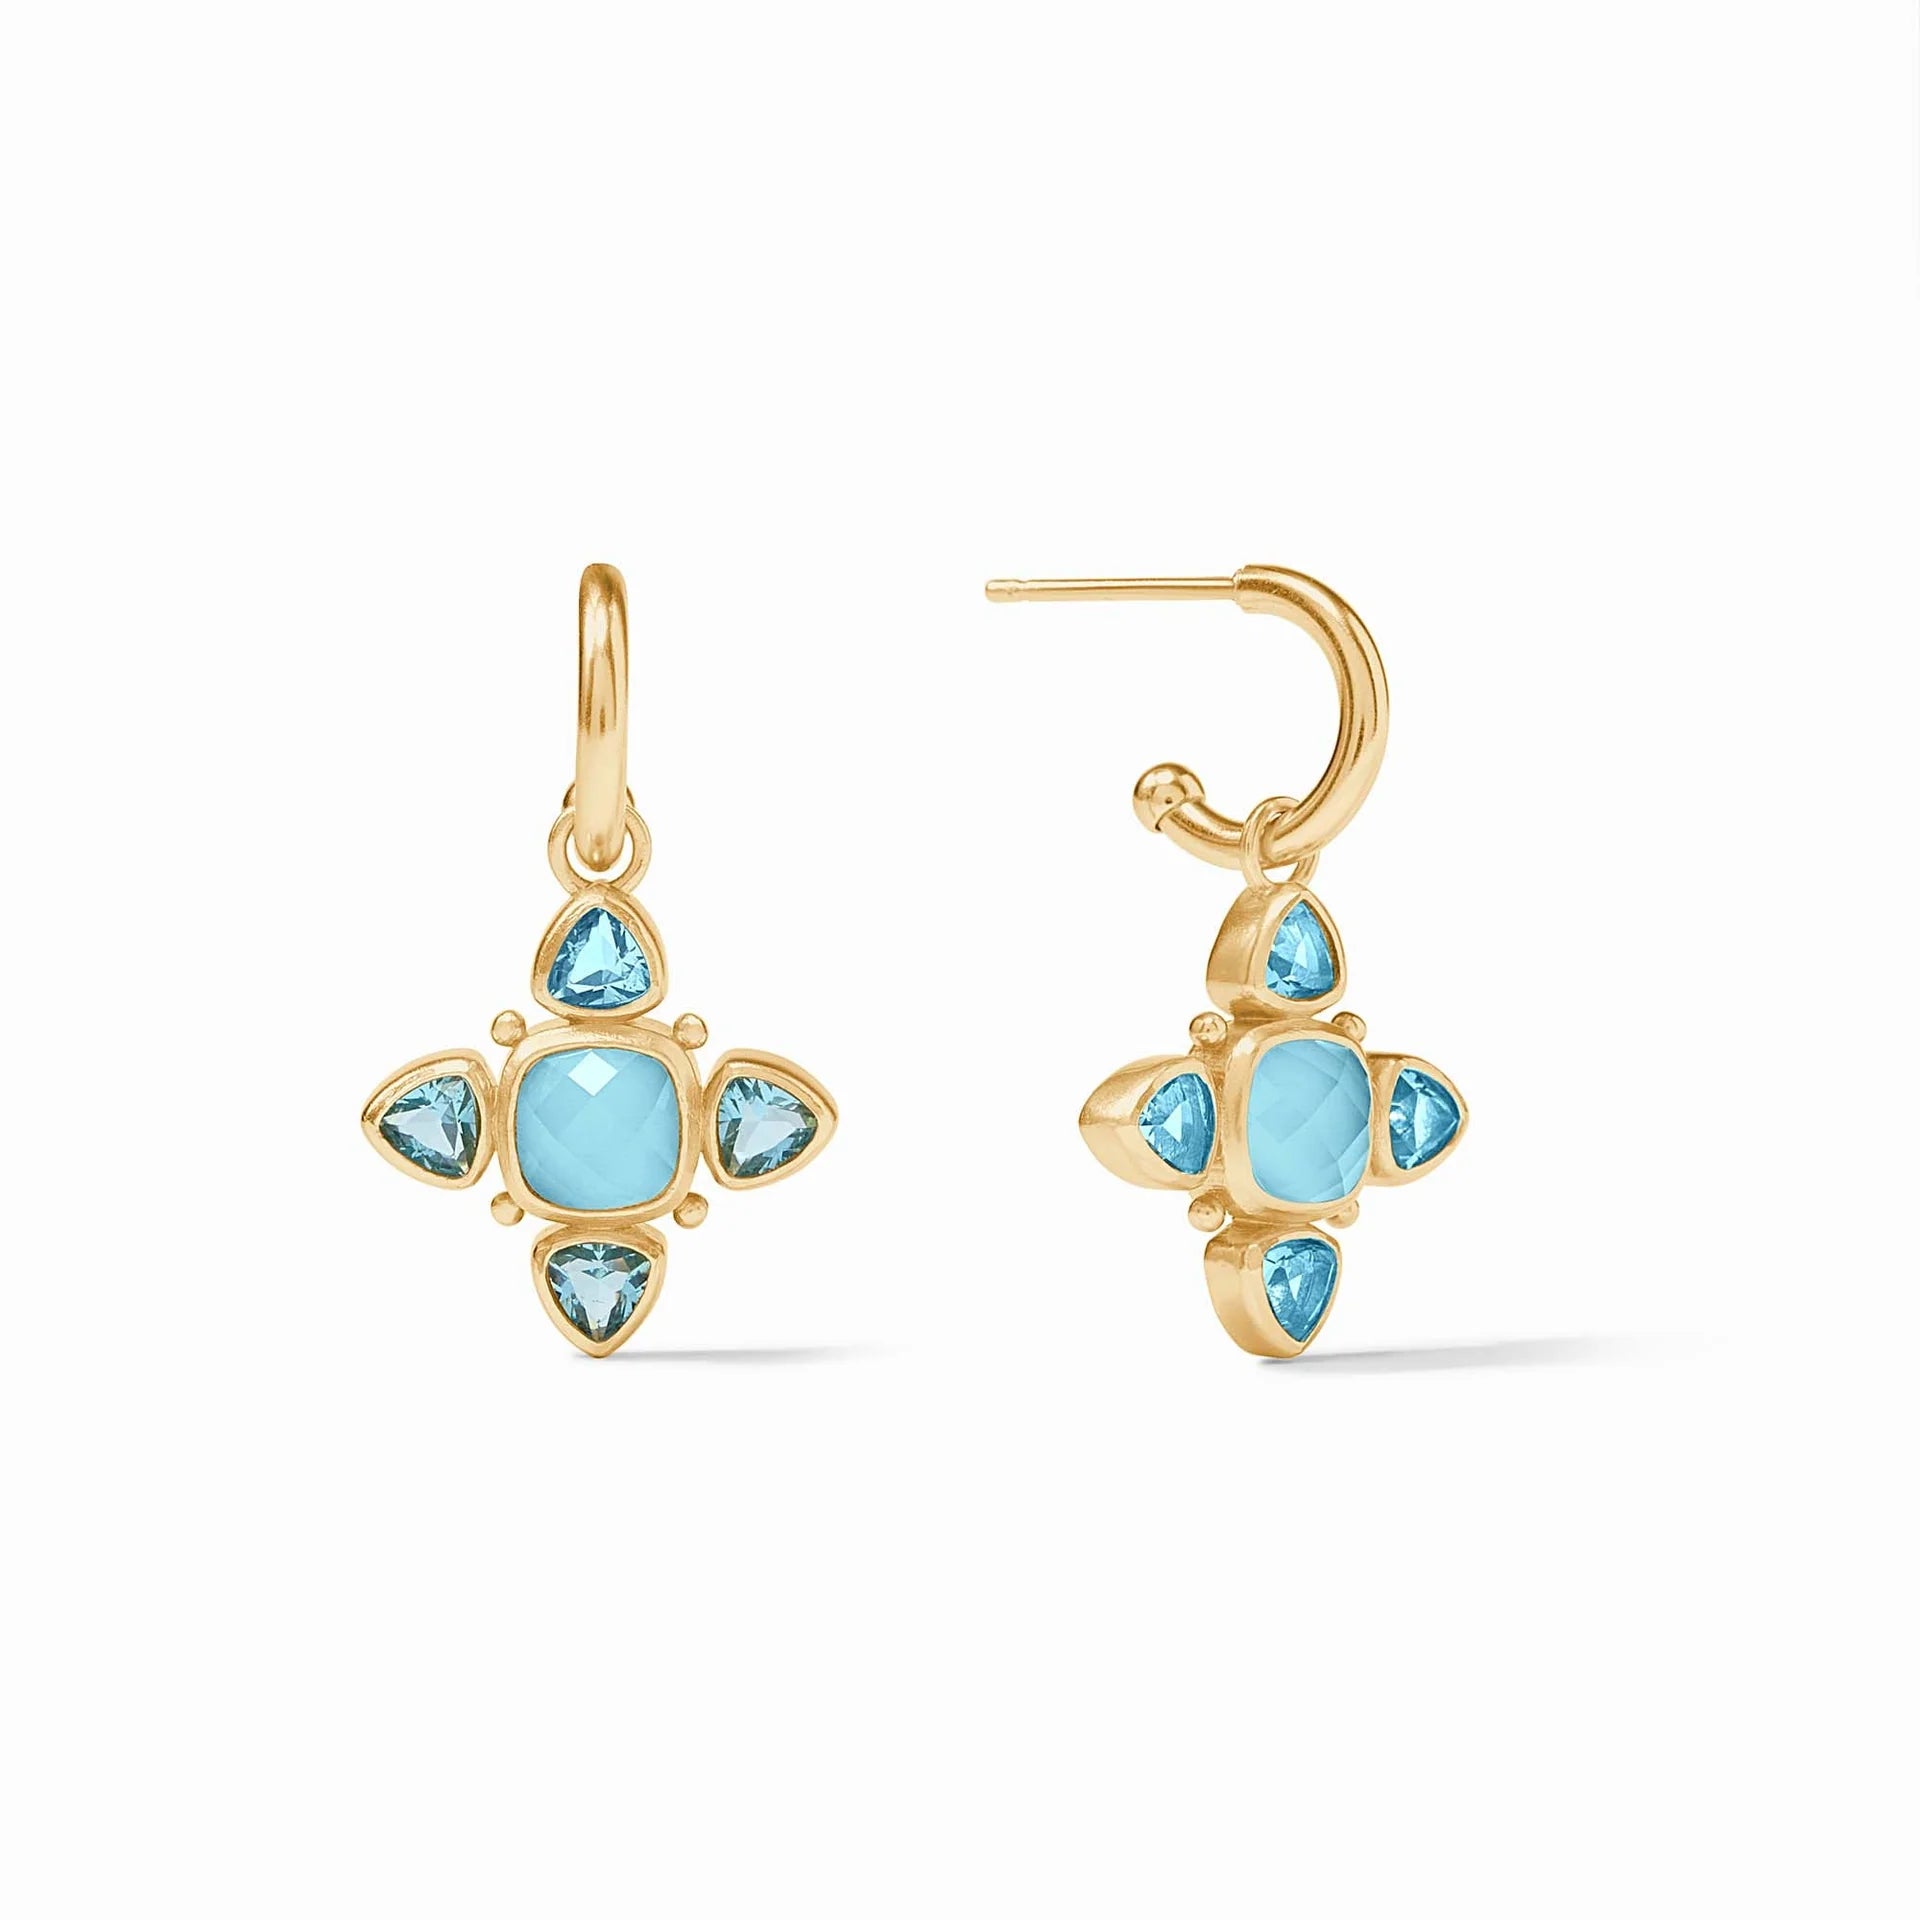 Julie Vos Aquitaine Hoop and Charm 24K Gold Plated with Iridescent Capri Blue Earrings